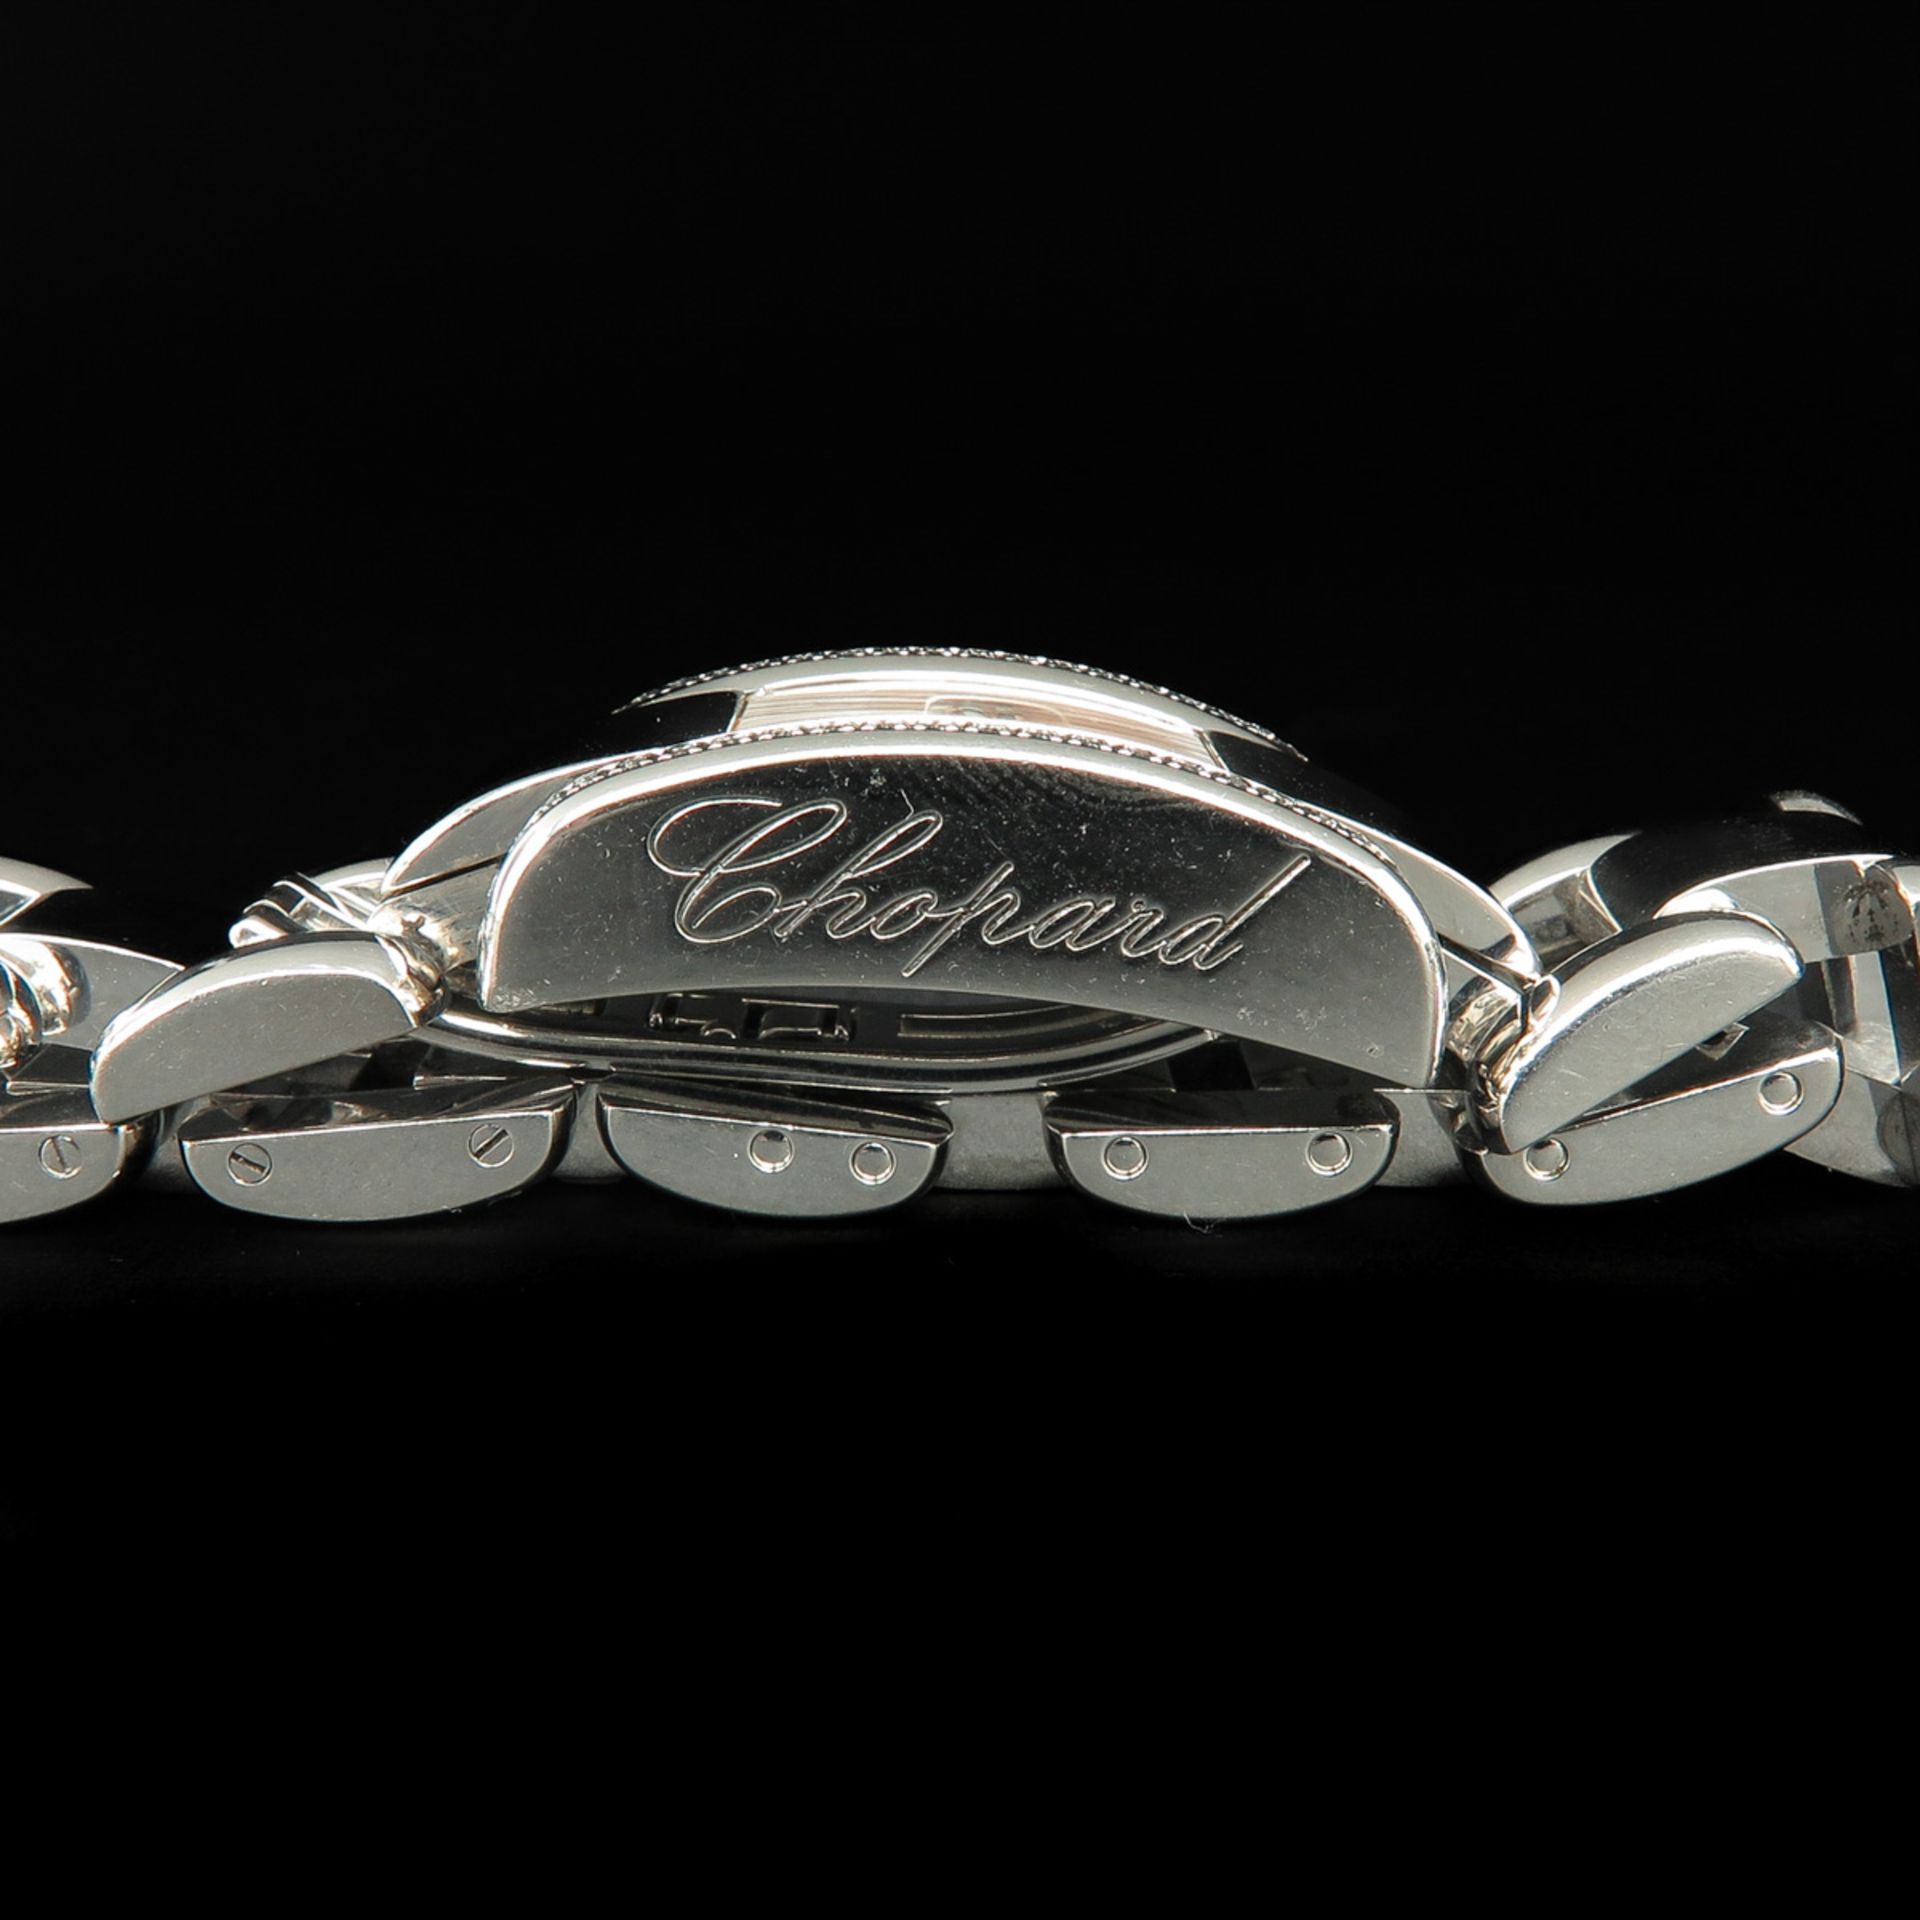 A Ladies Chopard Watch - Image 6 of 7